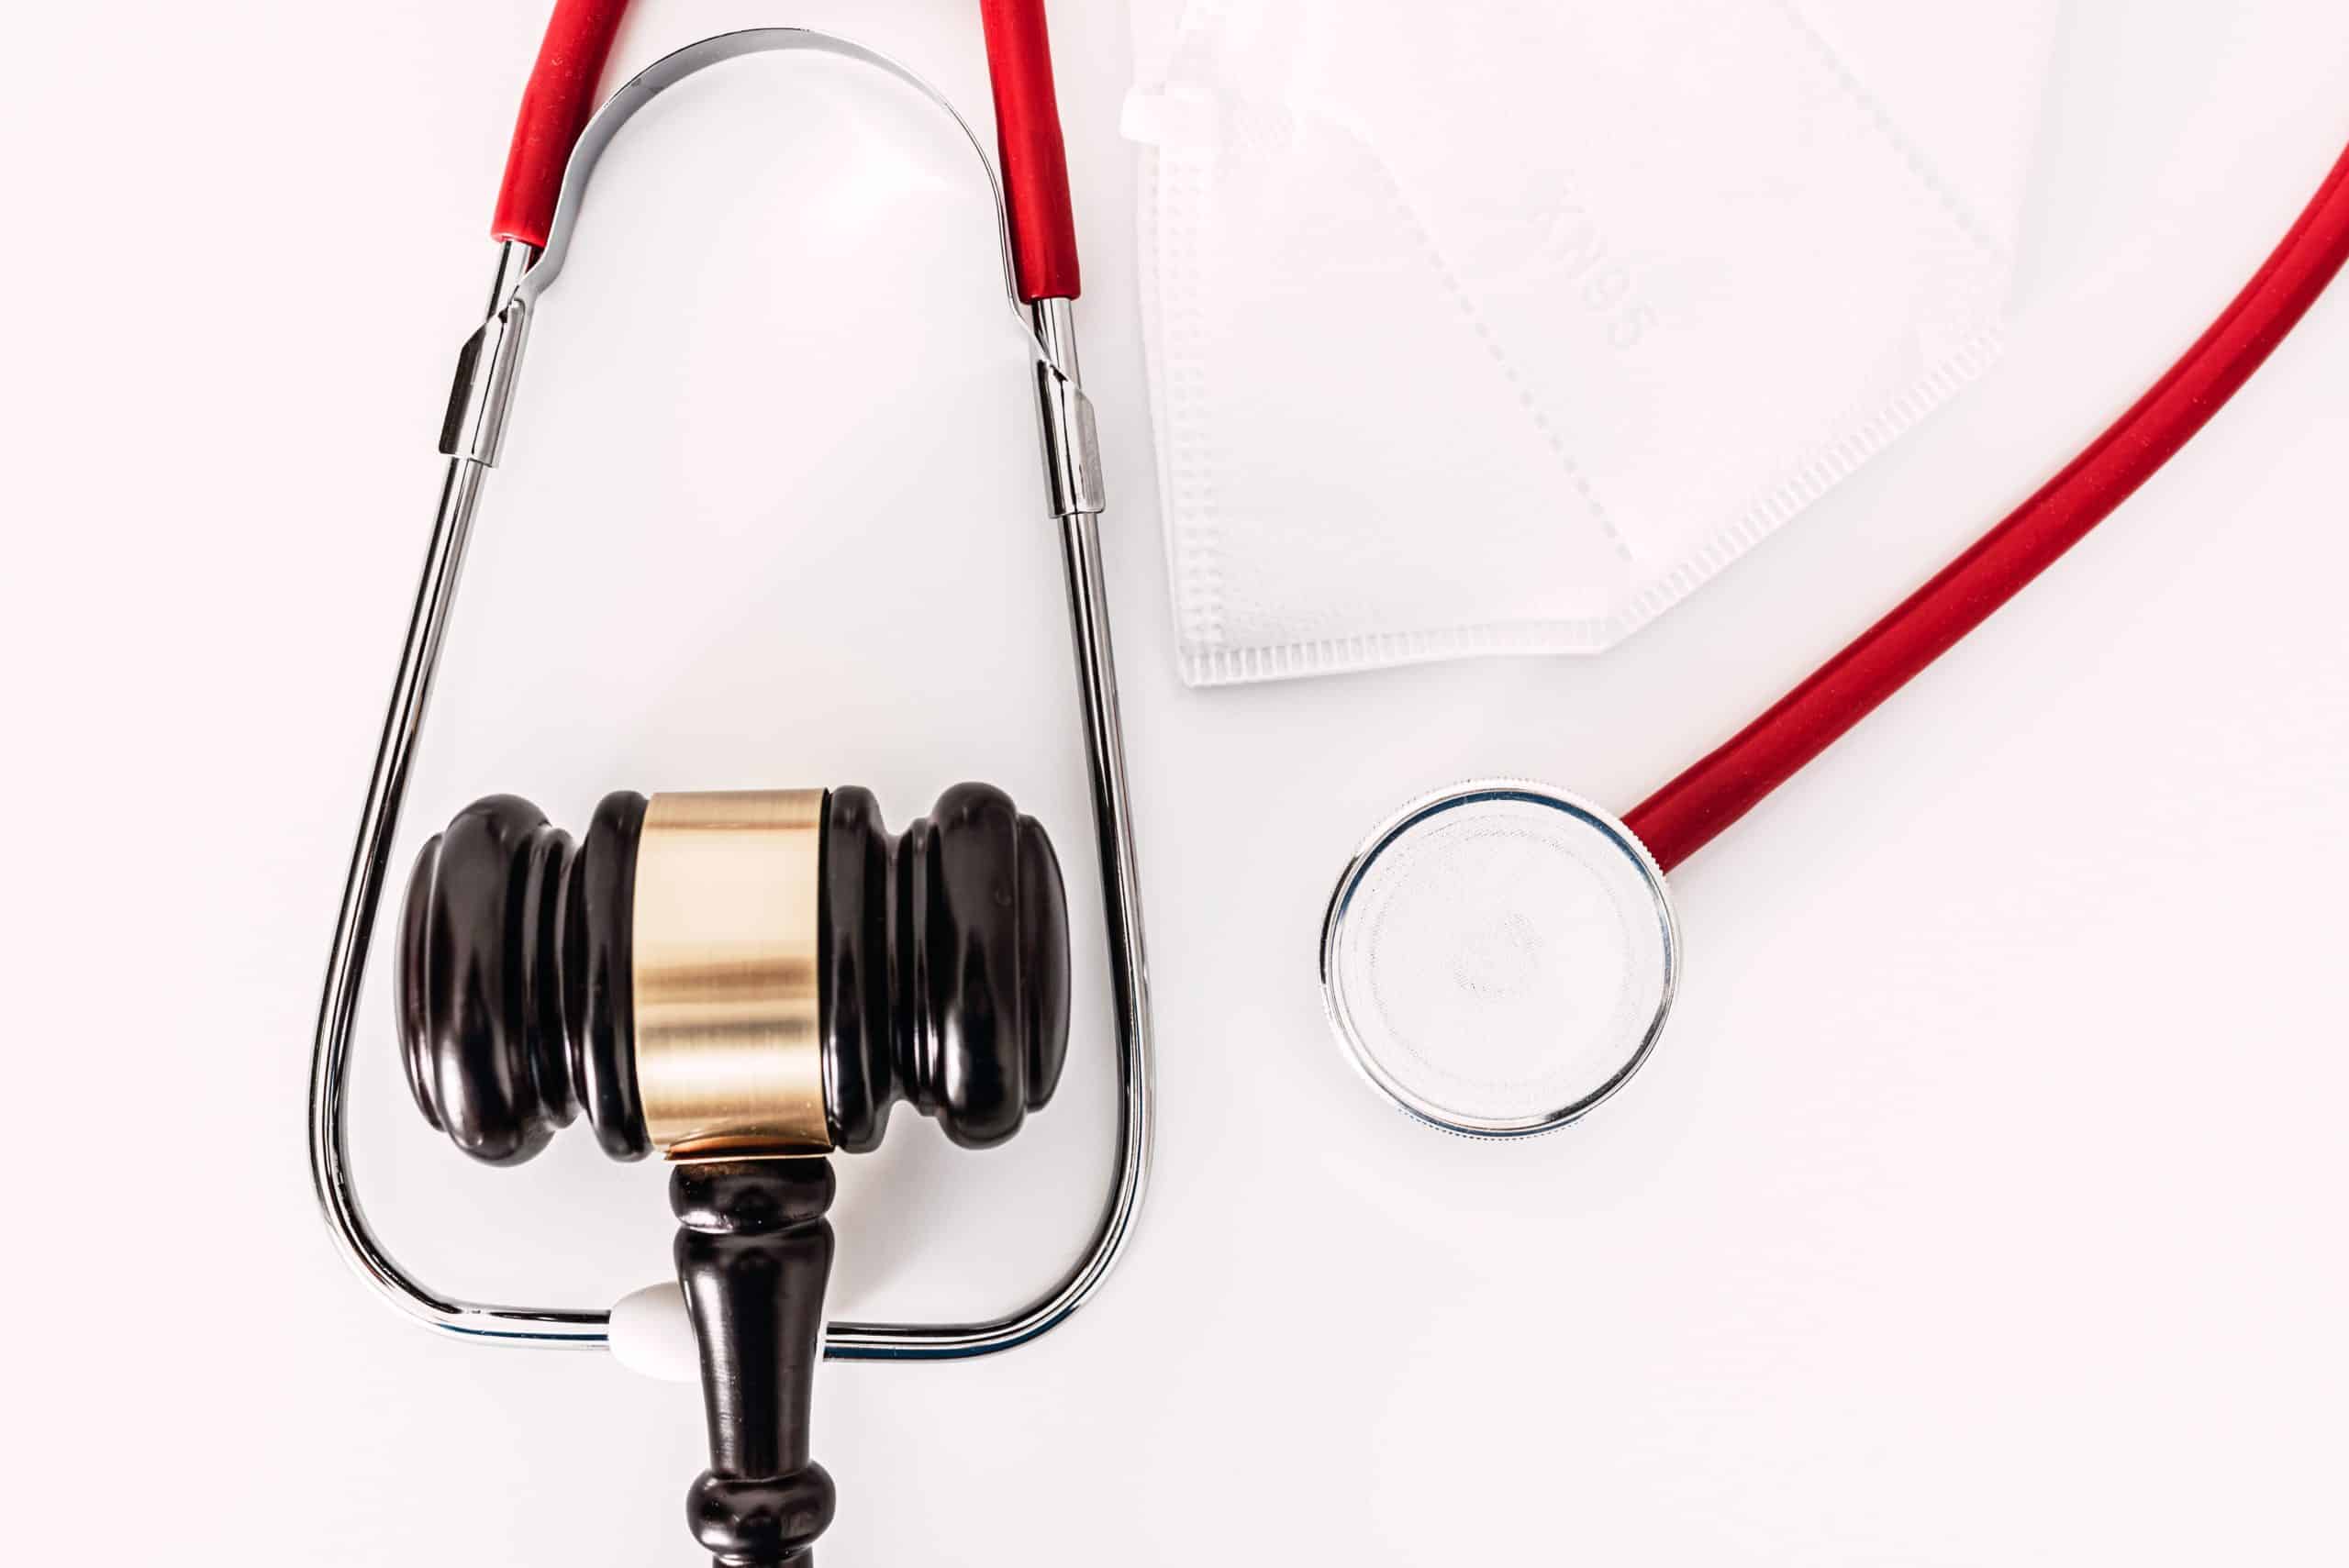 lawsuits for Medical Malpractice